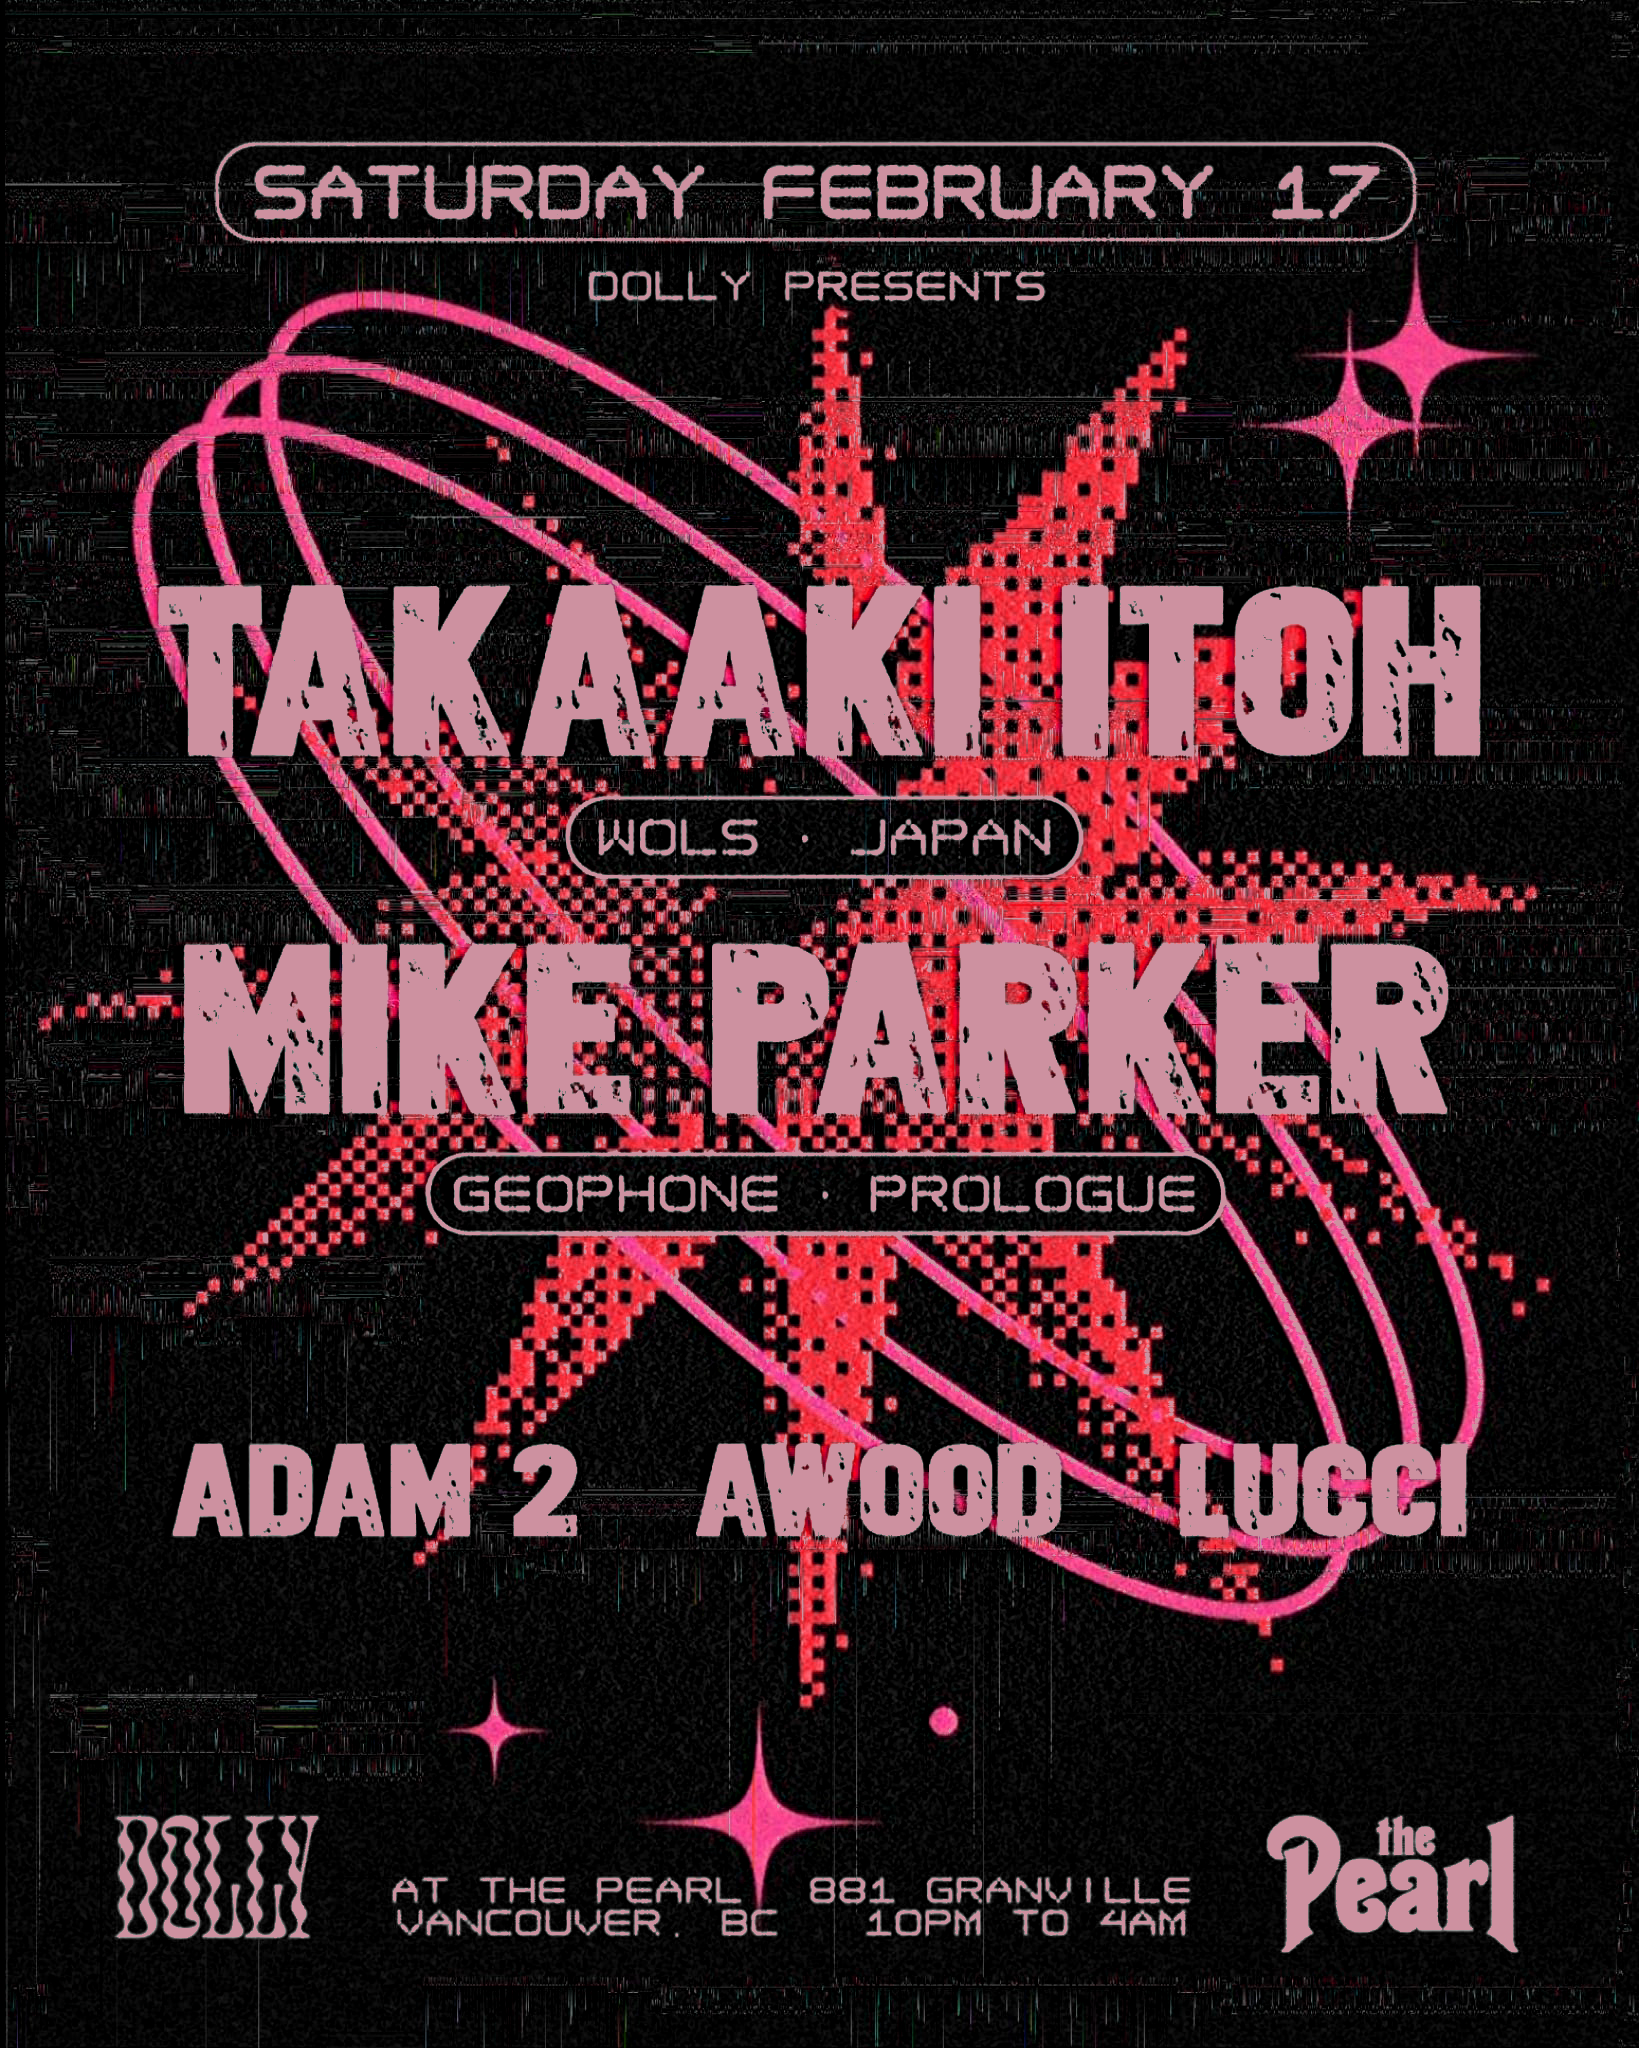 DOLLY presents: Takaaki Itoh (Wols, Japan) + Mike Parker (Geophone, Prologue) - Página frontal